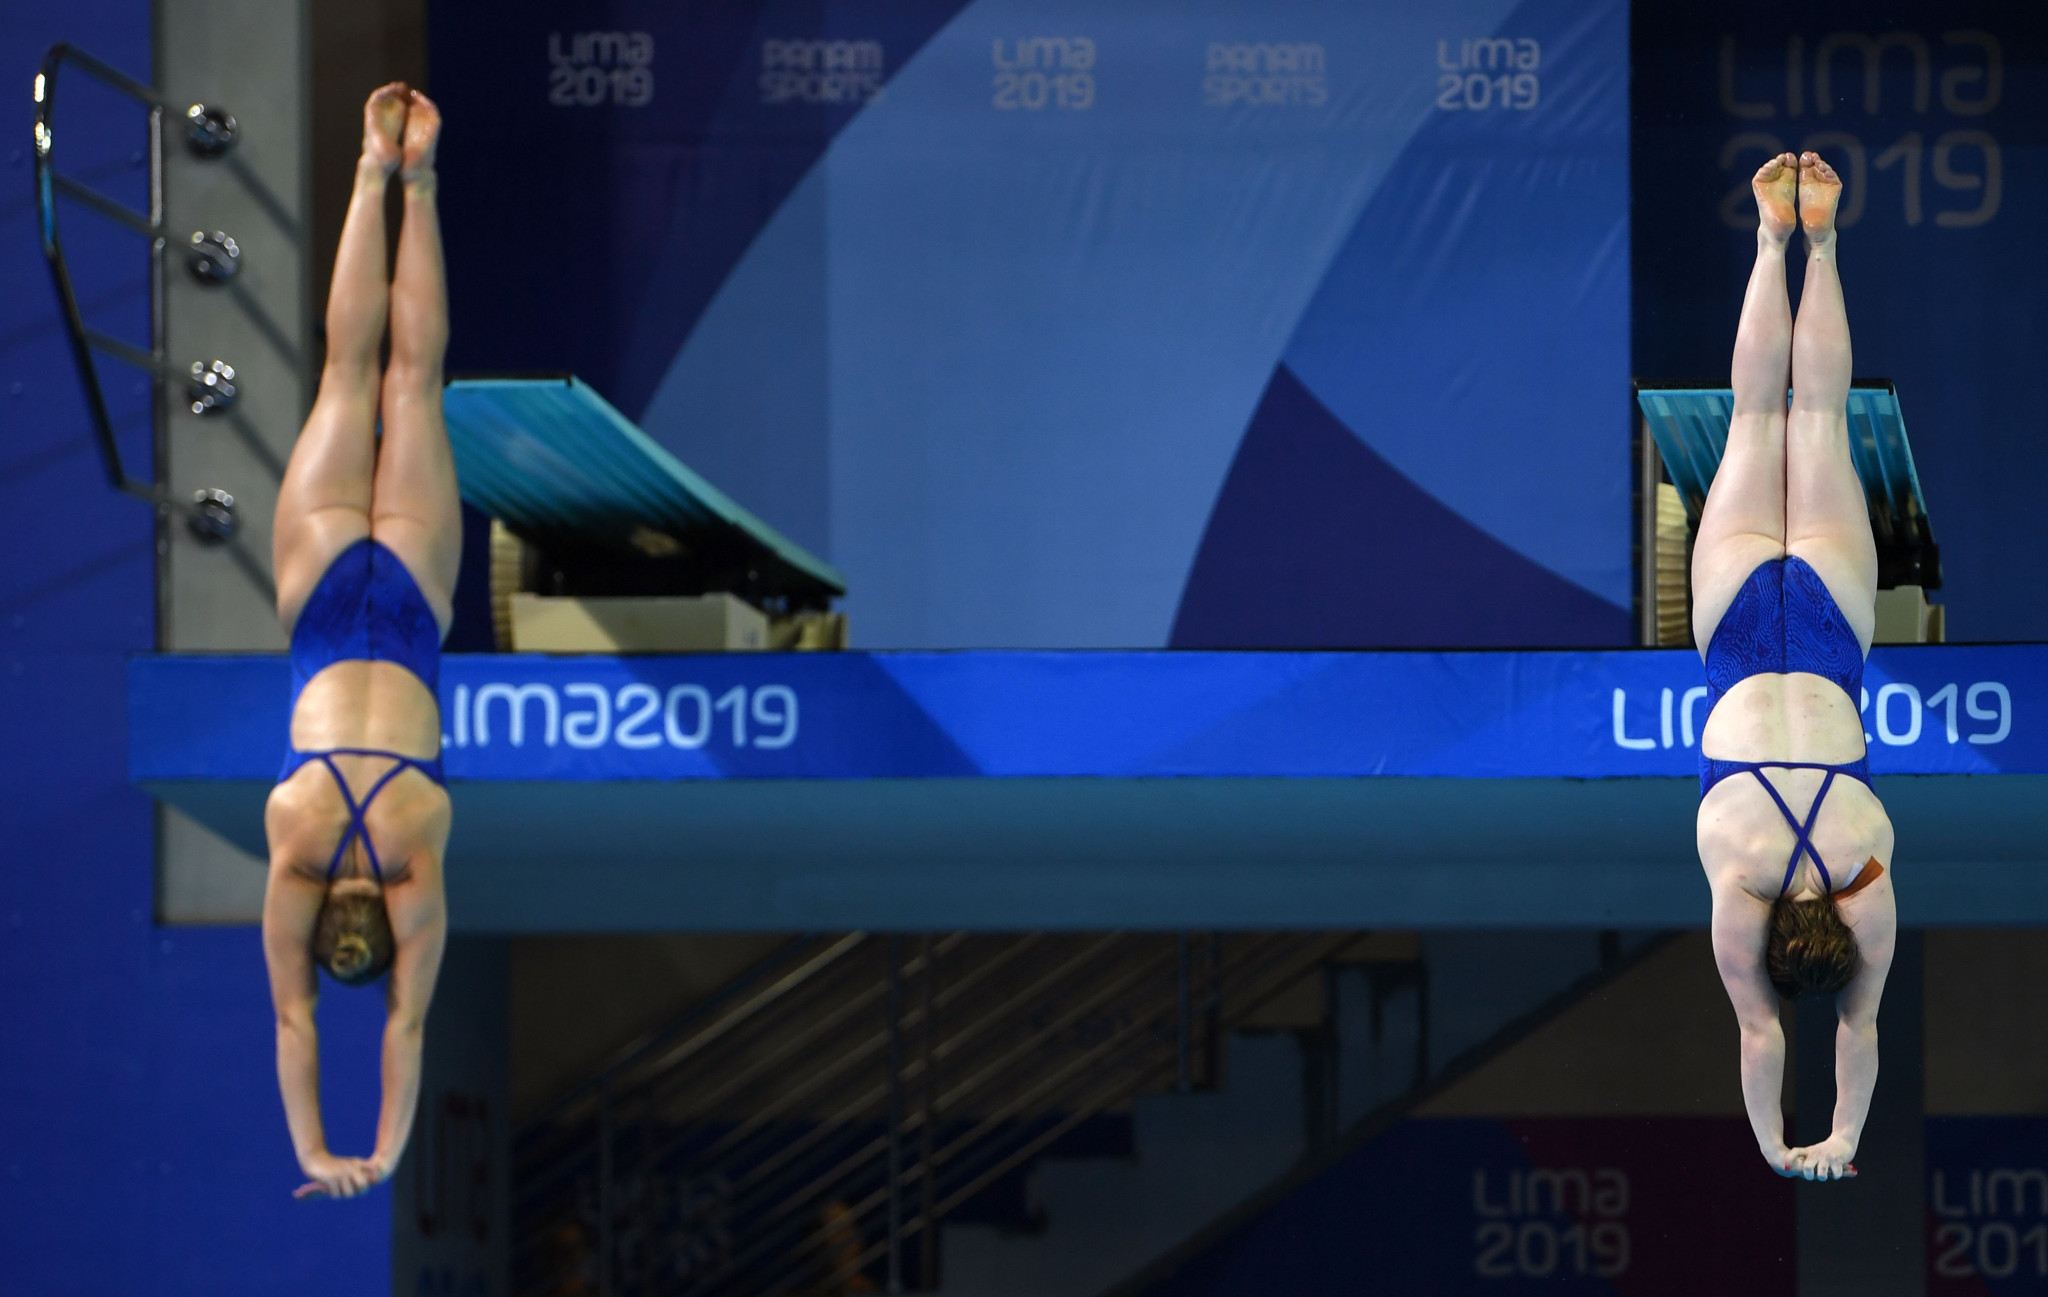 The women's 3m synchronised platform title was up for grabs ©Getty Images